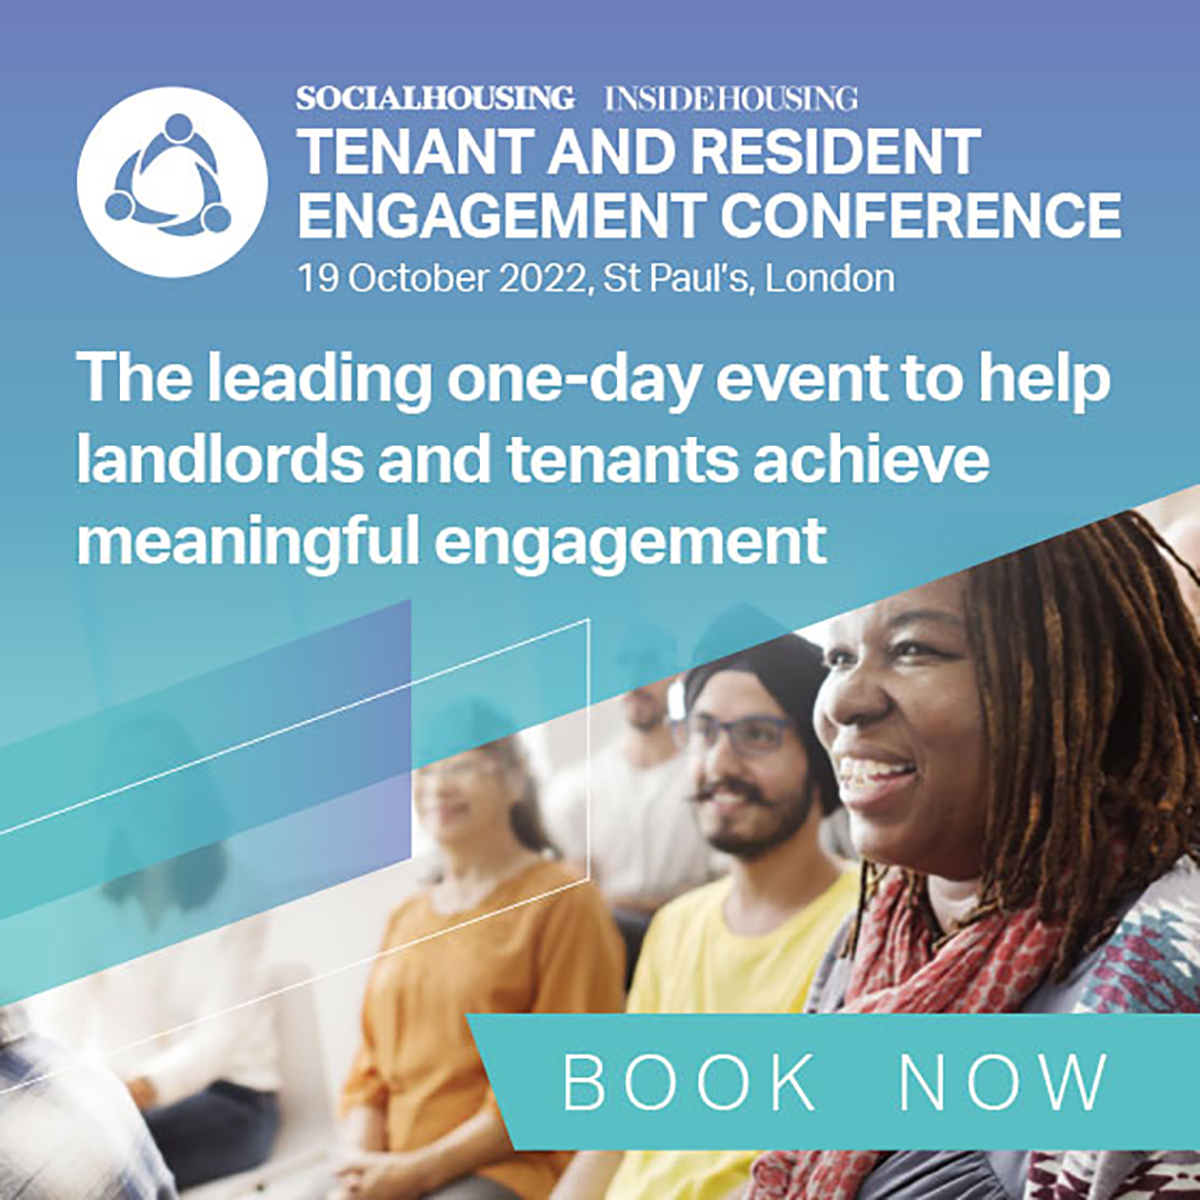 Register for the Tenant and Resident Engagement Conference